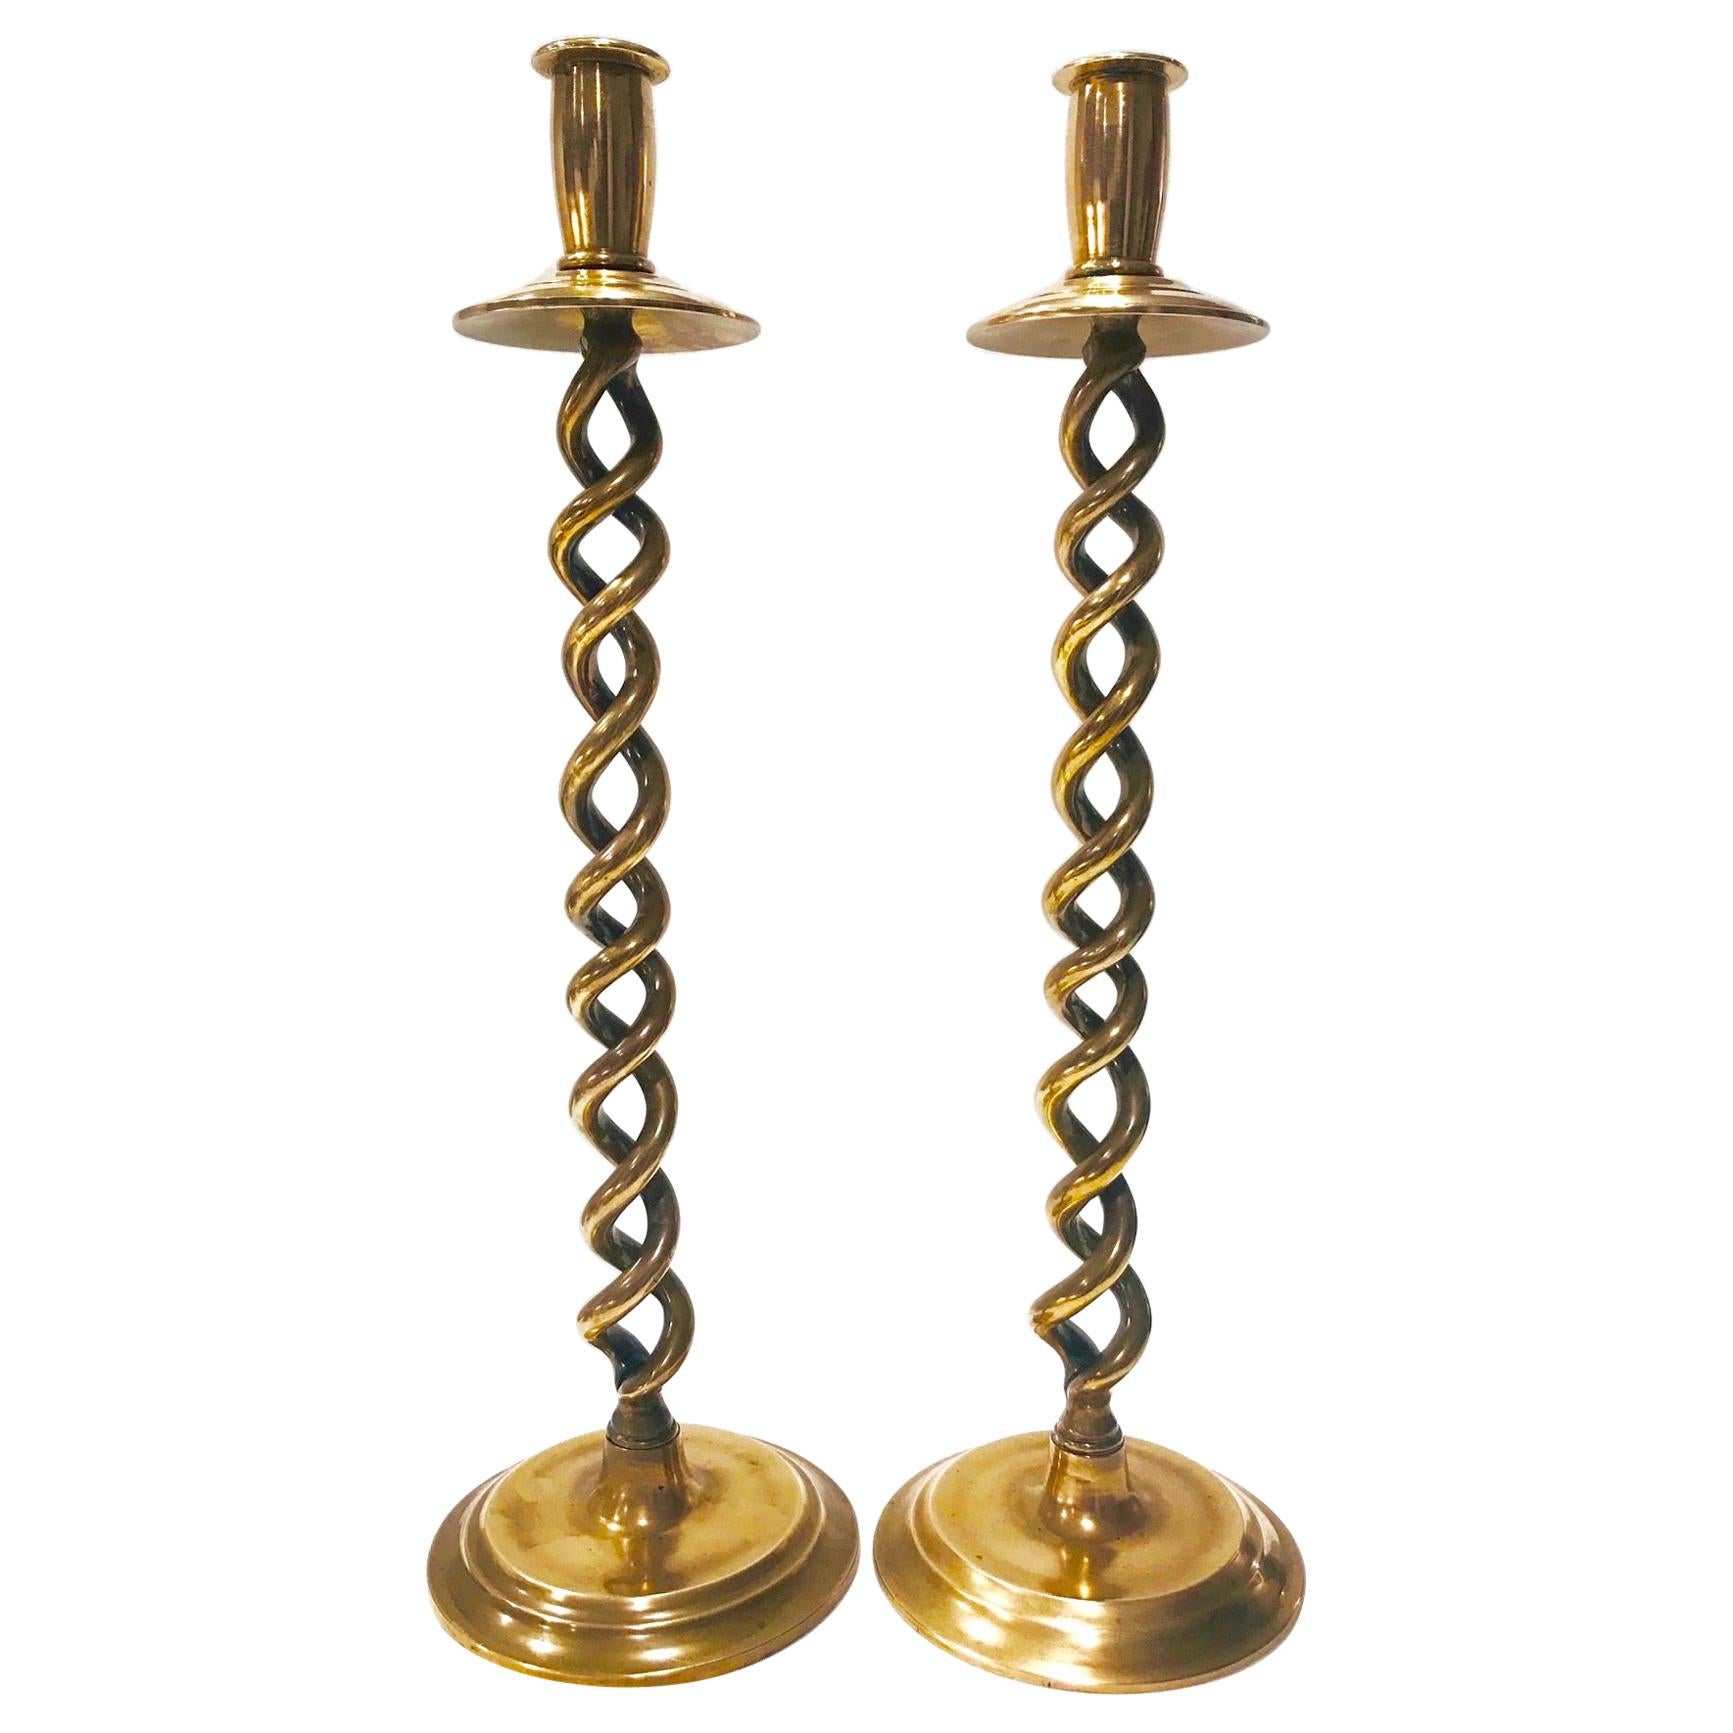 Pair of English Victorian Brass Spiral Candlesticks, Early 20th Century